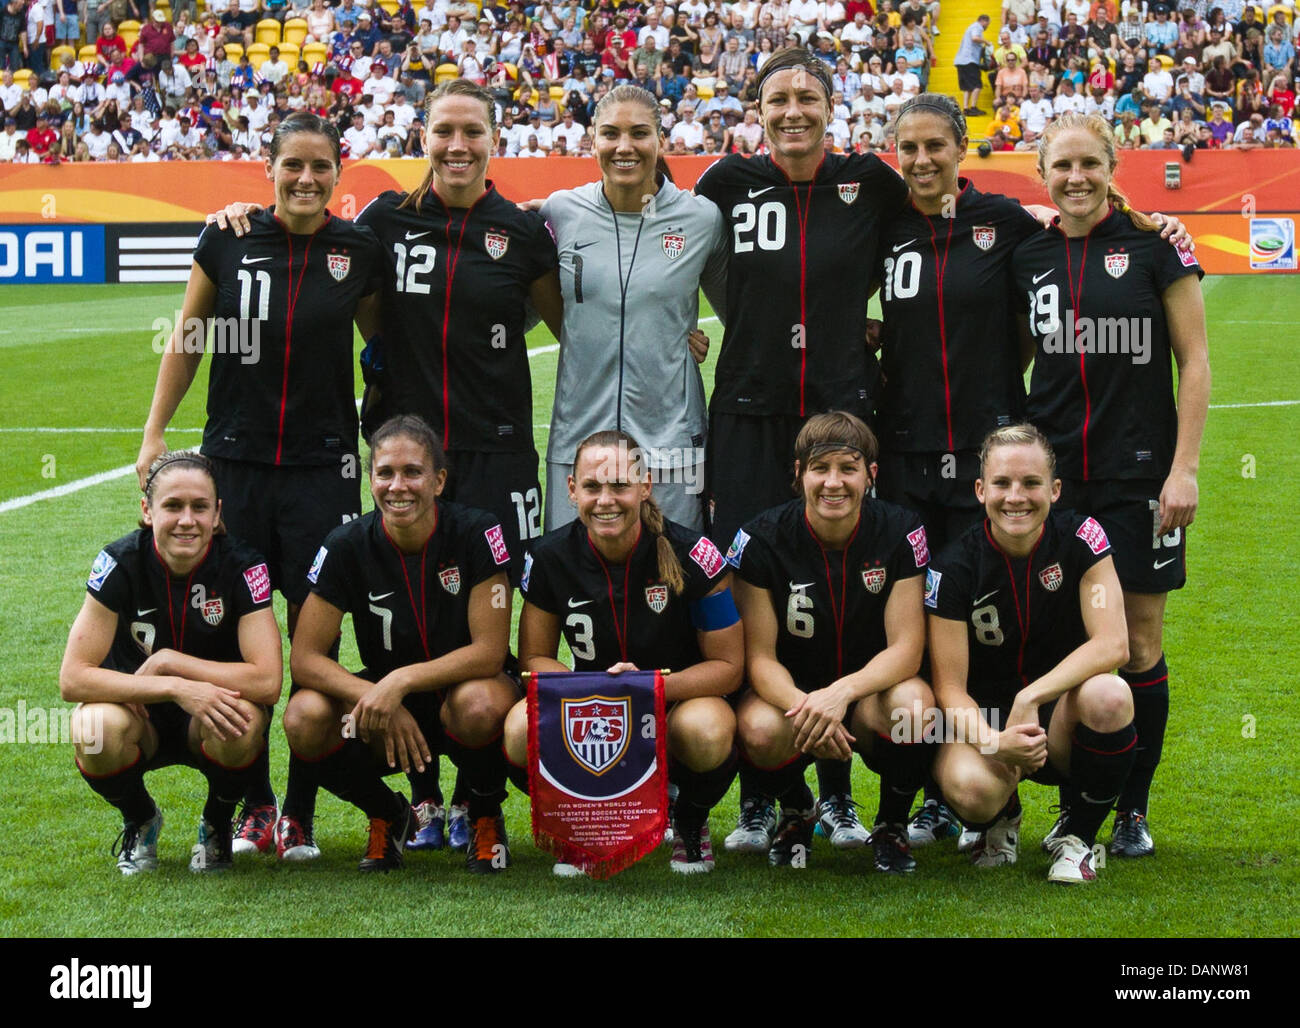 Players of USA pose for a teamphoto prior to the quarter-final soccer match of FIFA Women's World Cup between Brazil and USA at the Rudolf Harbig stadium in Dresden, Germany, 10 July 2011. Back (L-R): Alex Krieger, Lauren Cheney, Hope Solo, Abby Wambach, Carli Lloyd, Rachel Buehler, front (L-R): Heather O Reilly, Shannon Boxx, Christie Rampone, Amy Le Peilbet, Amy Rodriguez. Photo: Stock Photo